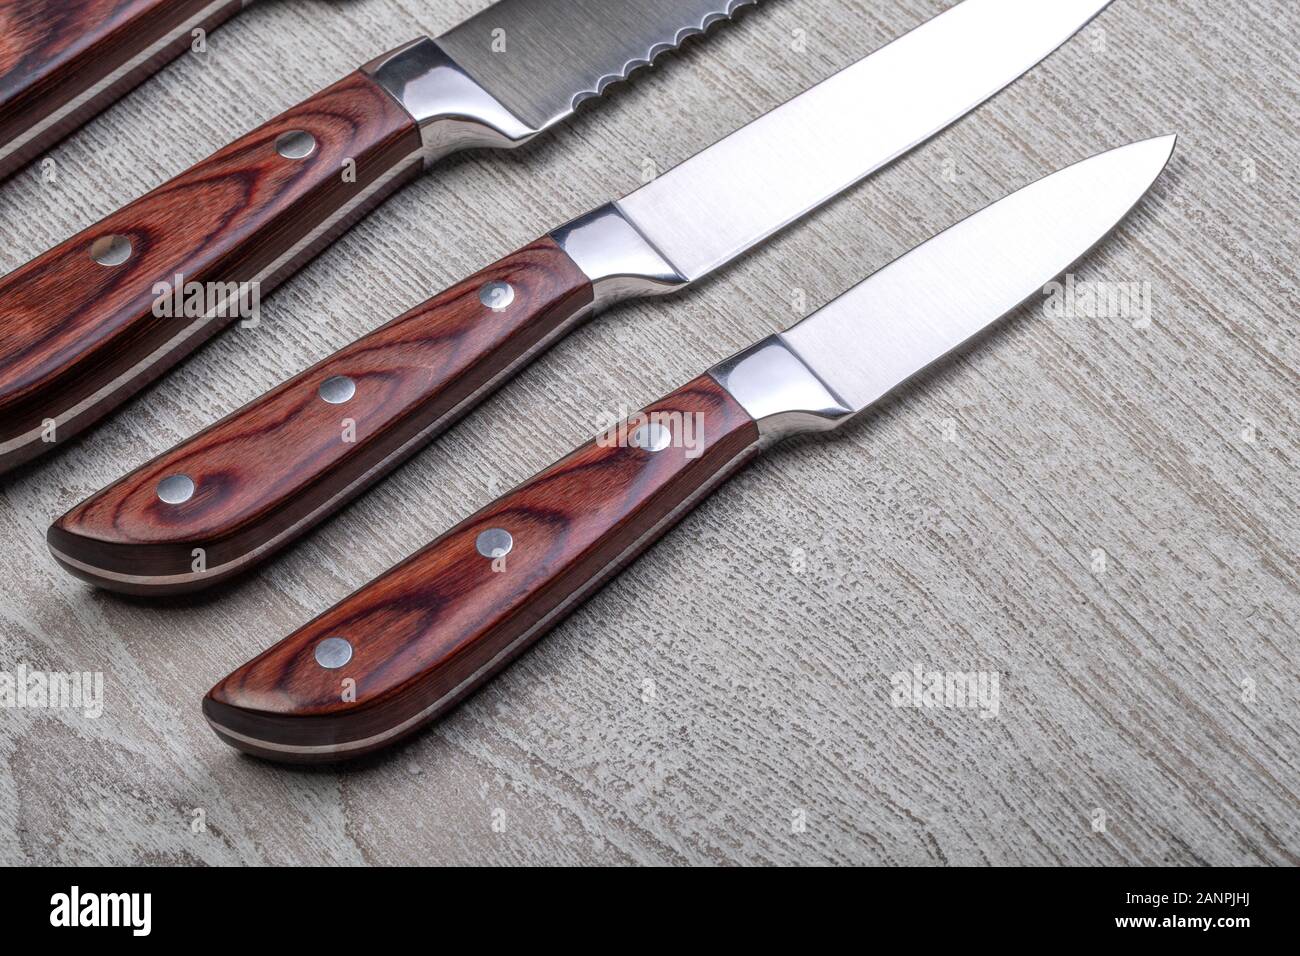 https://c8.alamy.com/comp/2ANPJHJ/knives-with-a-wooden-handlemade-of-steel-close-up-2ANPJHJ.jpg